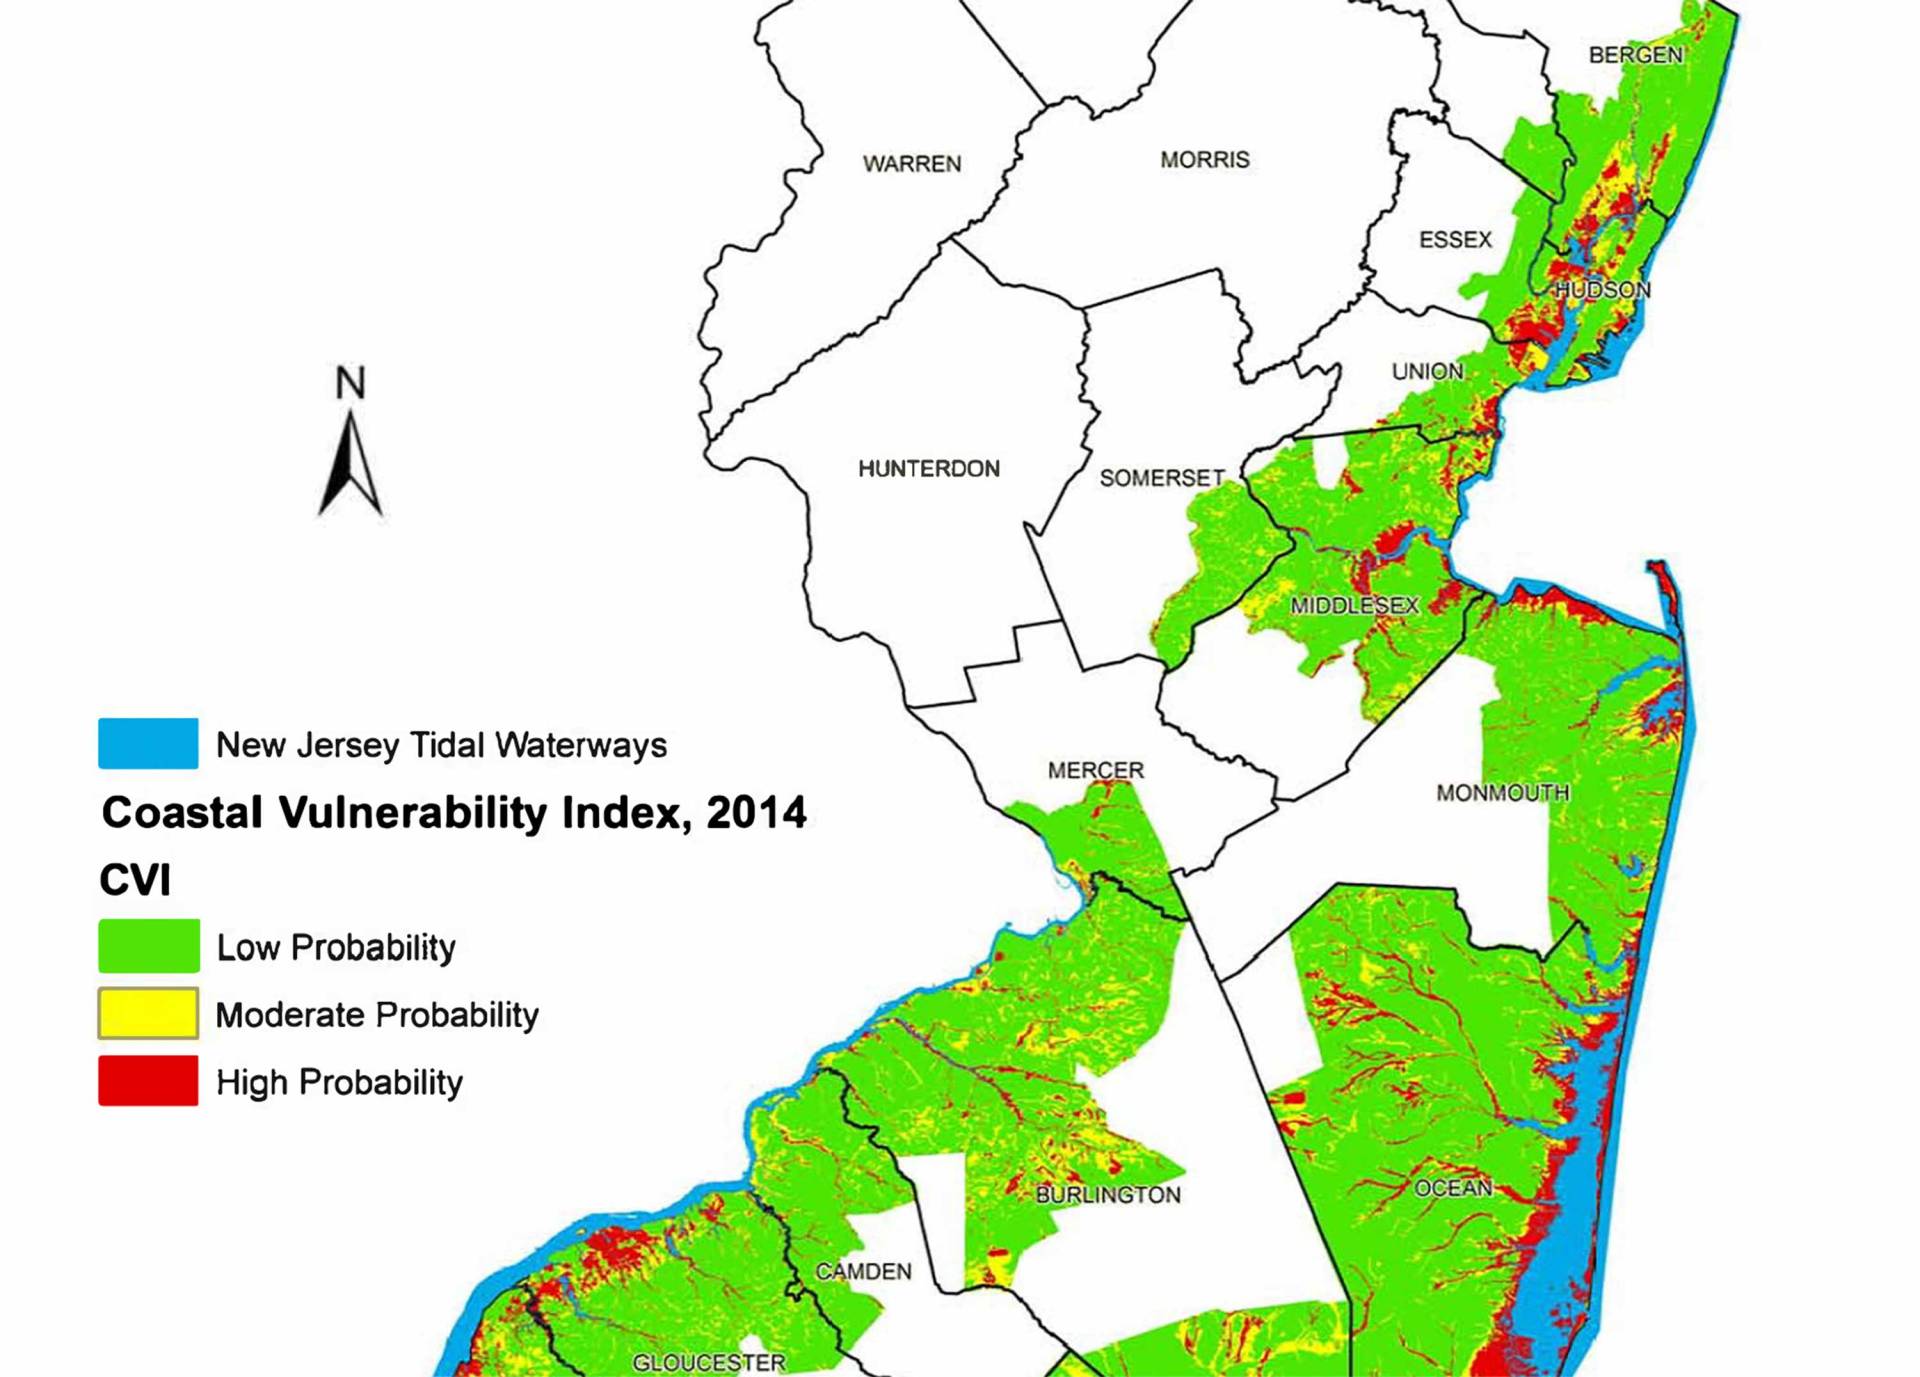 Coastal Vulnerablility Index showing low/moderate/high probability of area flooding 